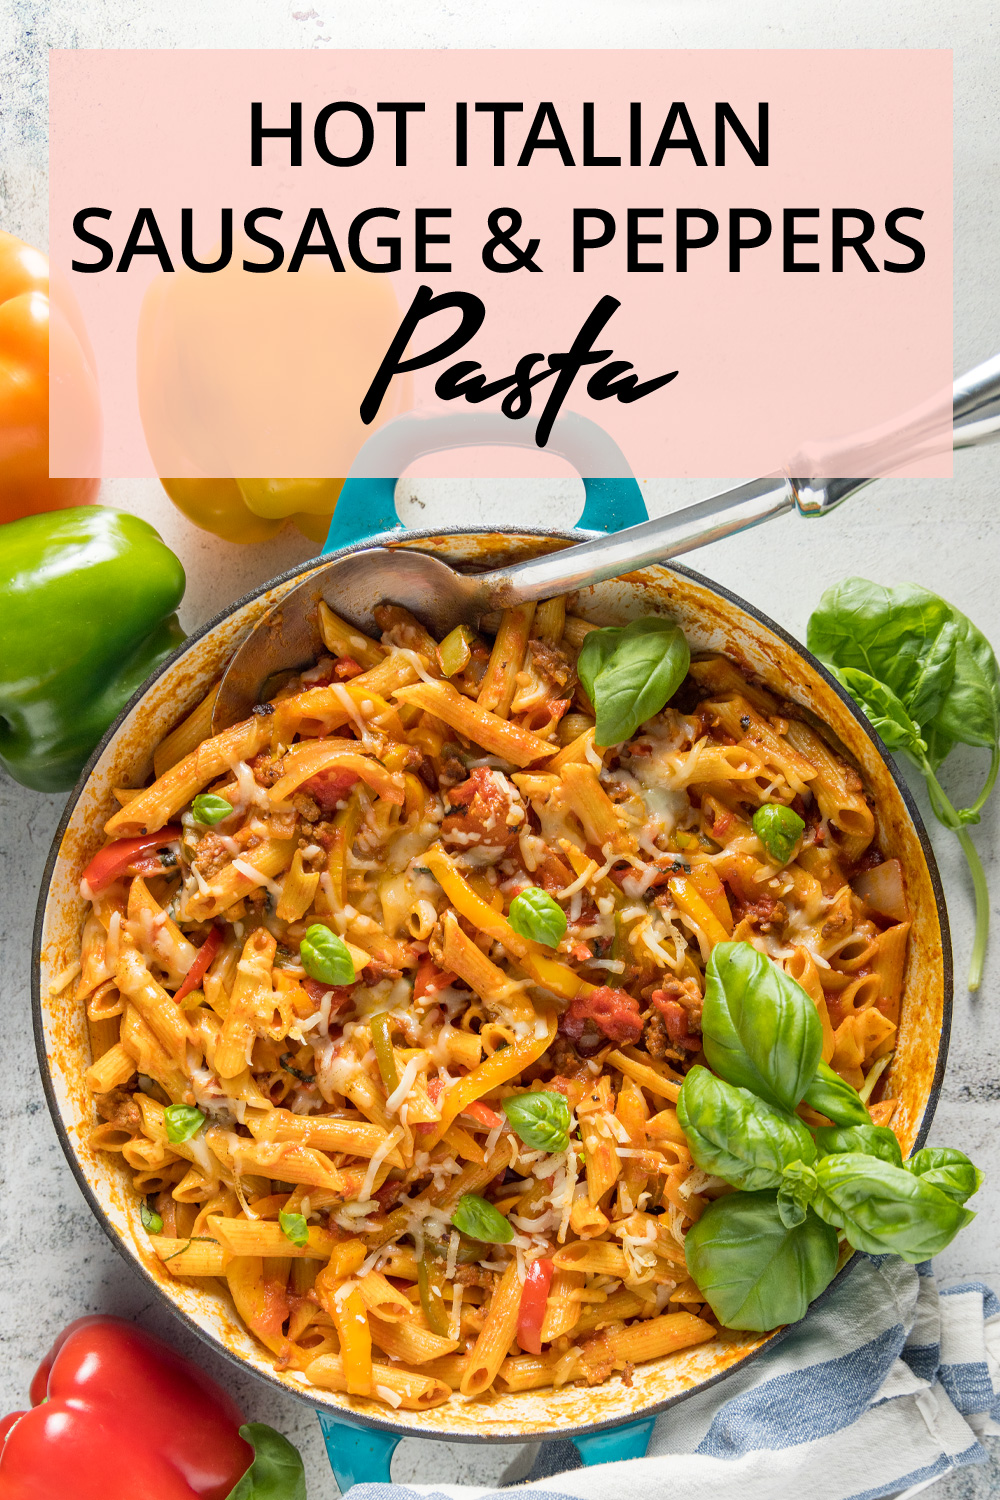 Italian Sausage and Peppers Pasta | Dinner at Lulu's